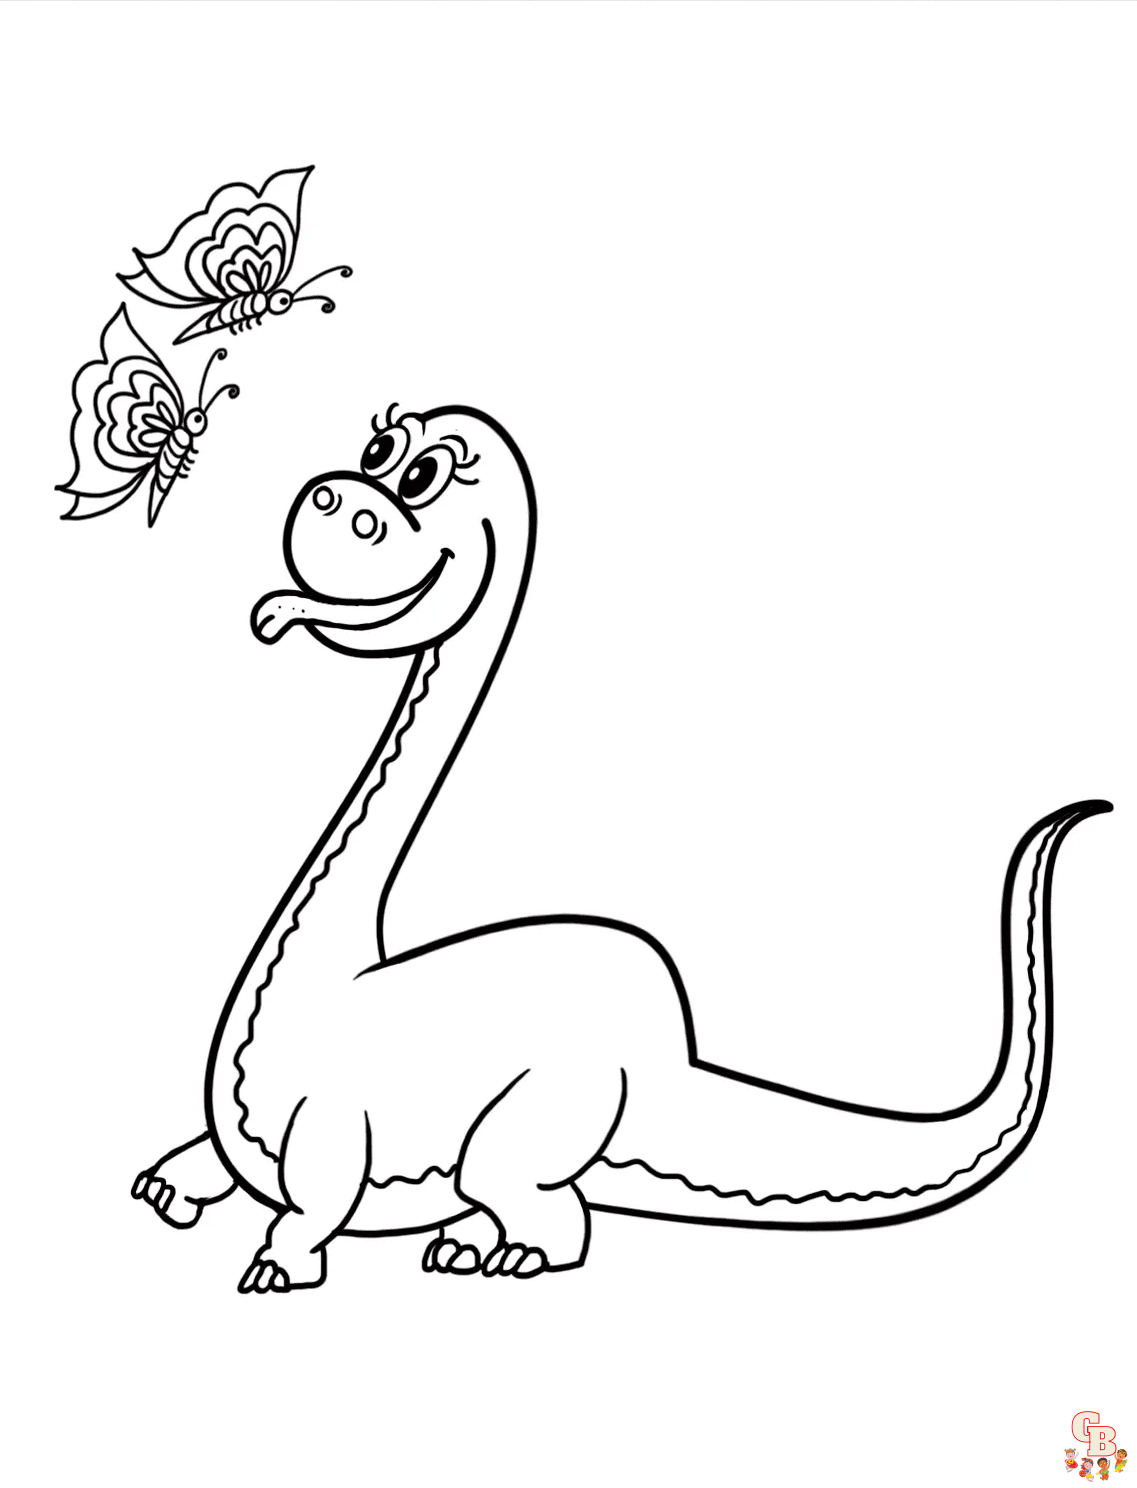 Brontosaurus Coloring Pages 4